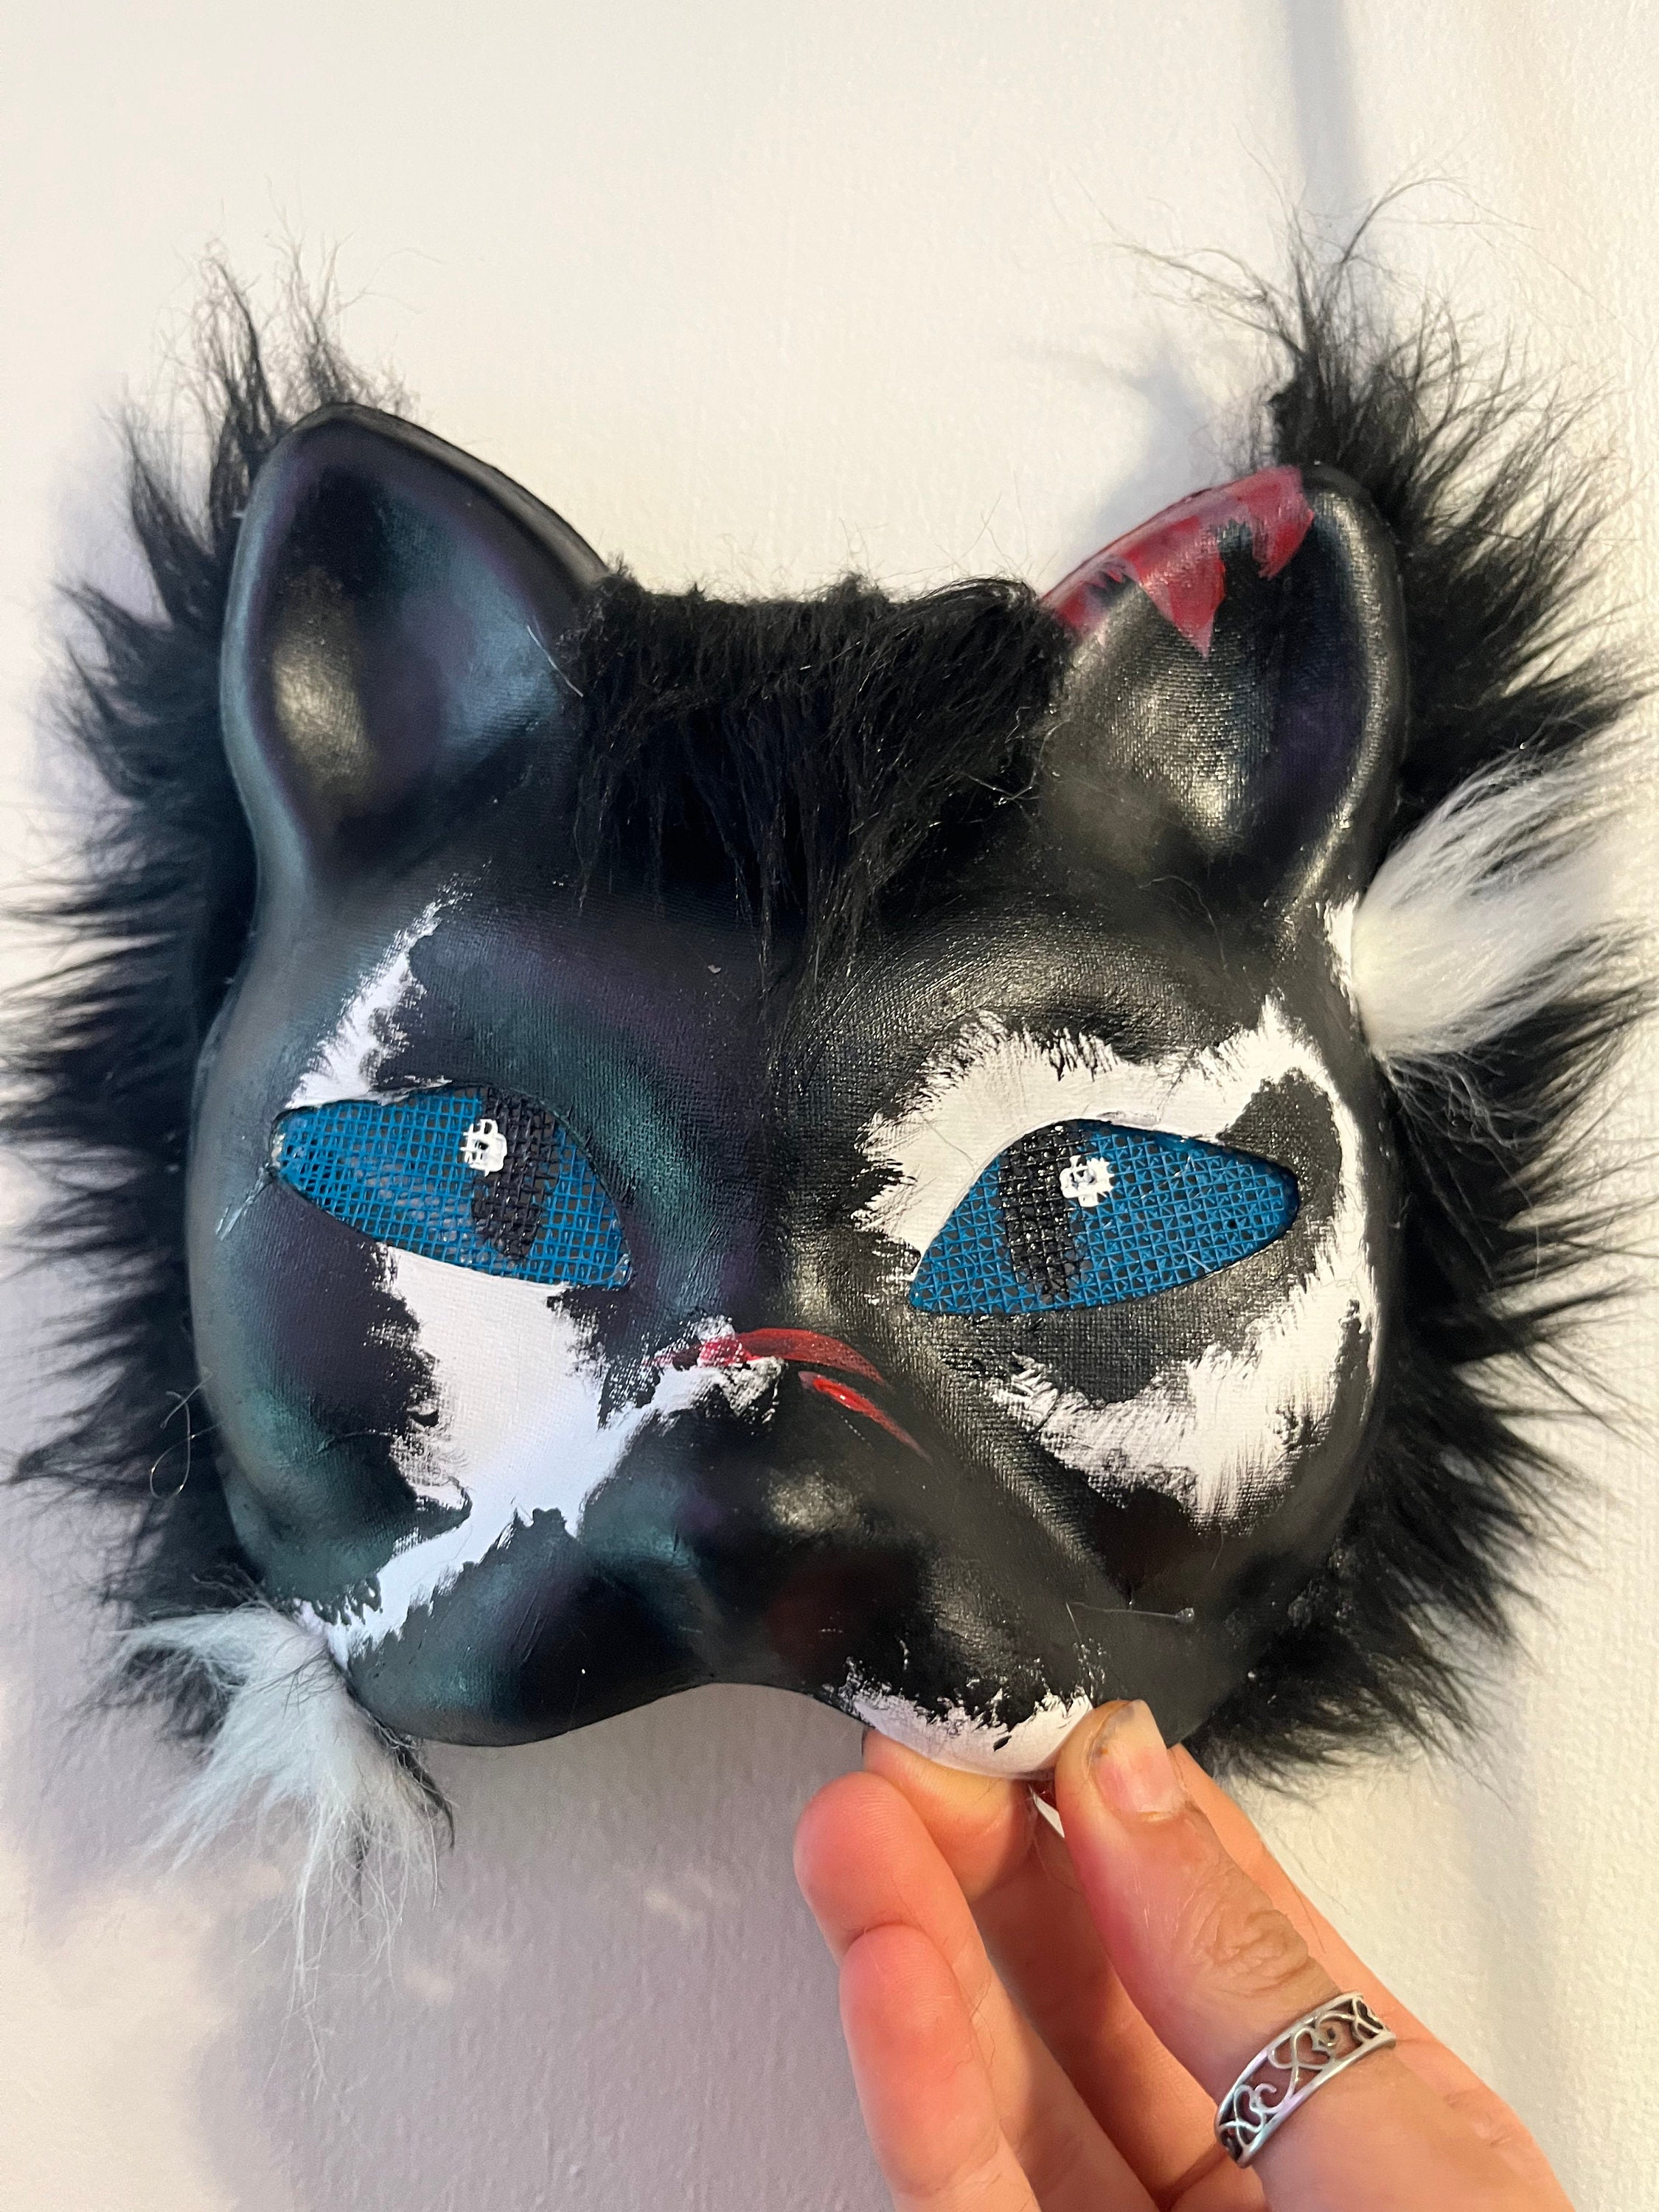 Tutorial on customs ears for therian masks! #quadrobics #therian